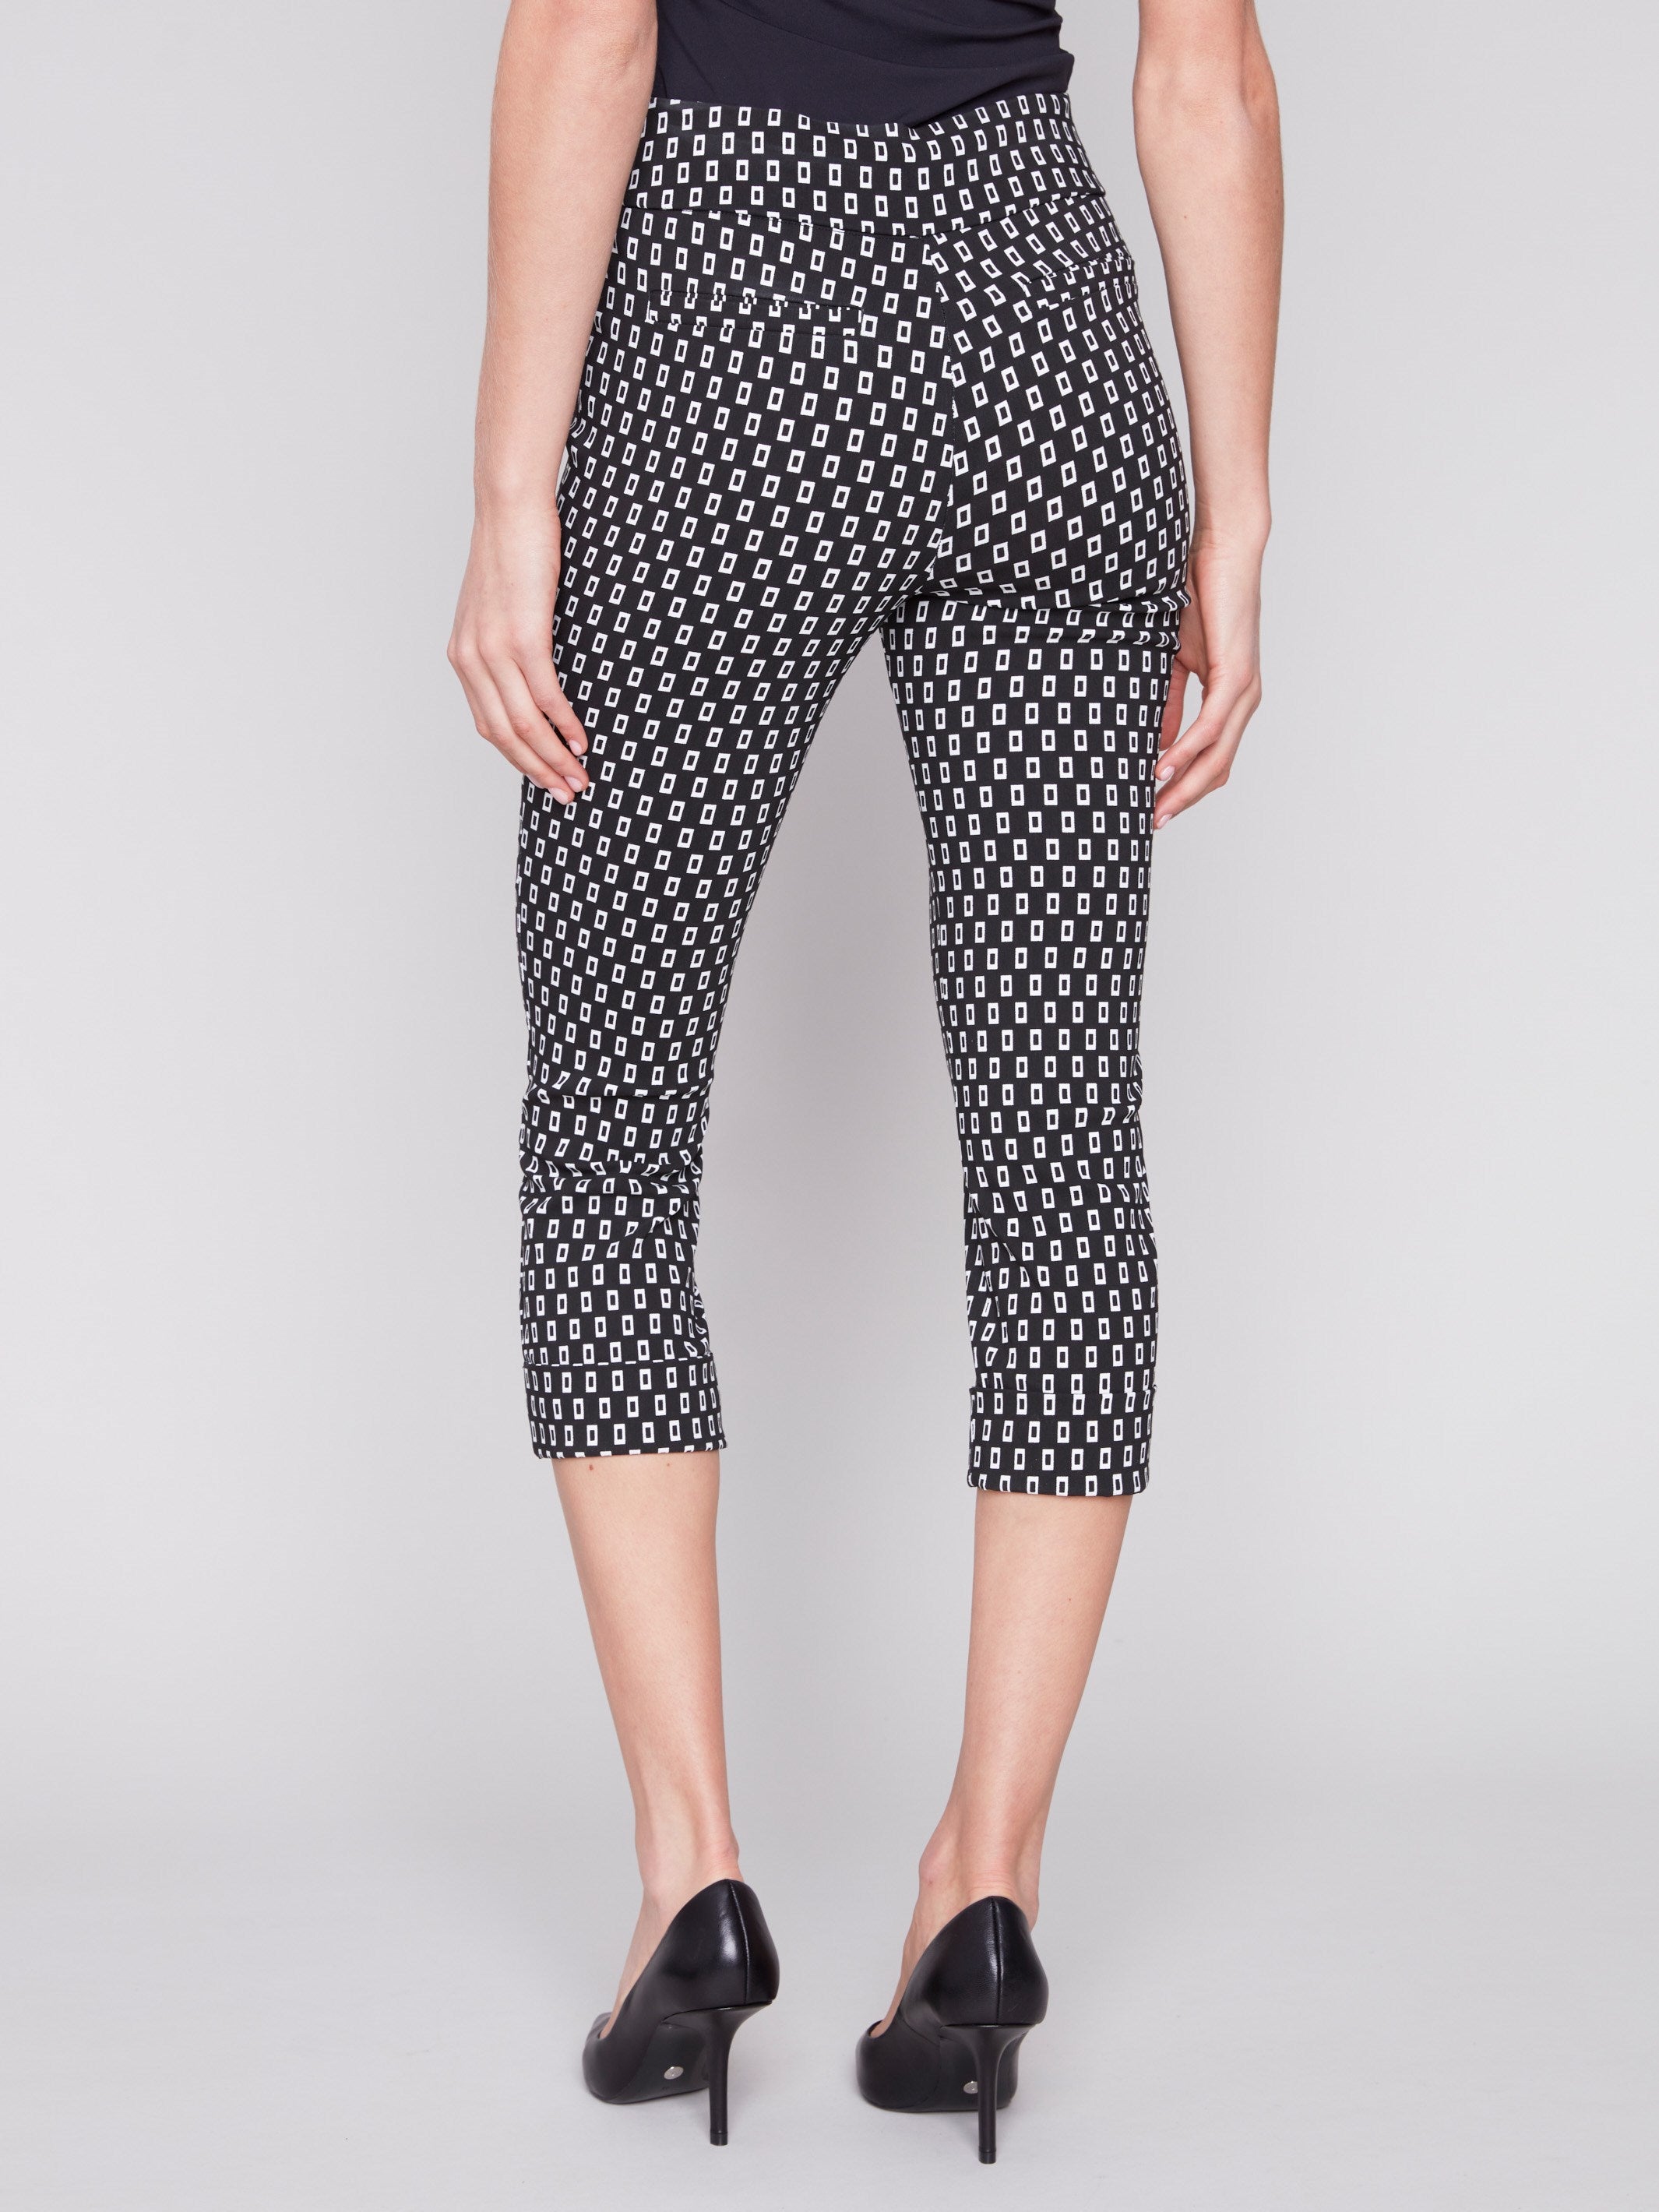 Printed Stretch Pull-On Capri Pants - White Tiles - Charlie B Collection Canada - Image 3